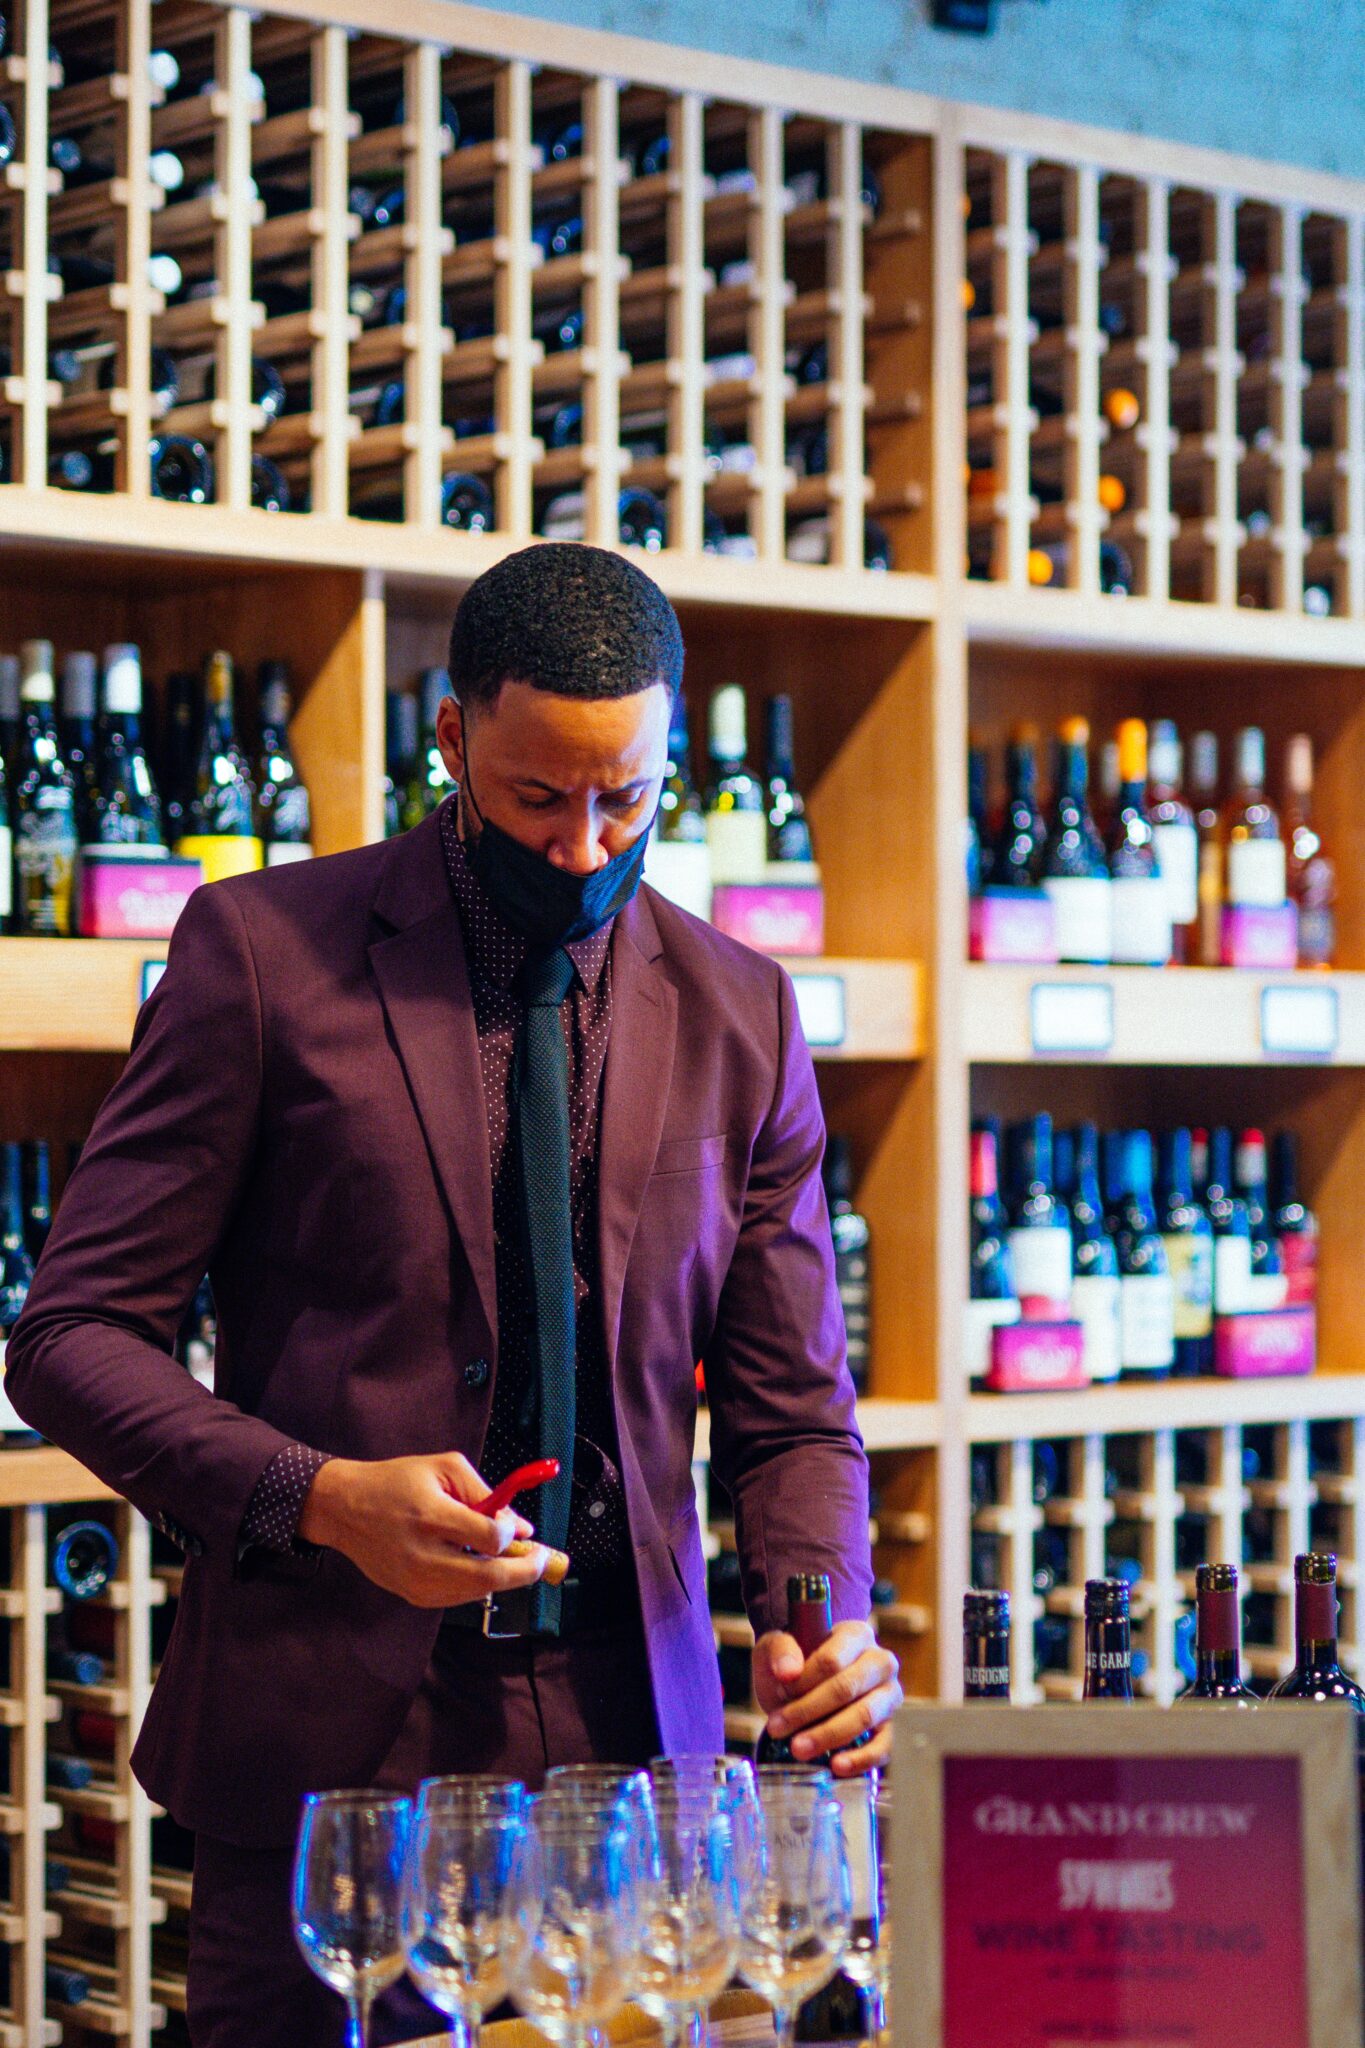 Devin Reed opening wine at the Grand Crew Premier Event in LA in December 2021